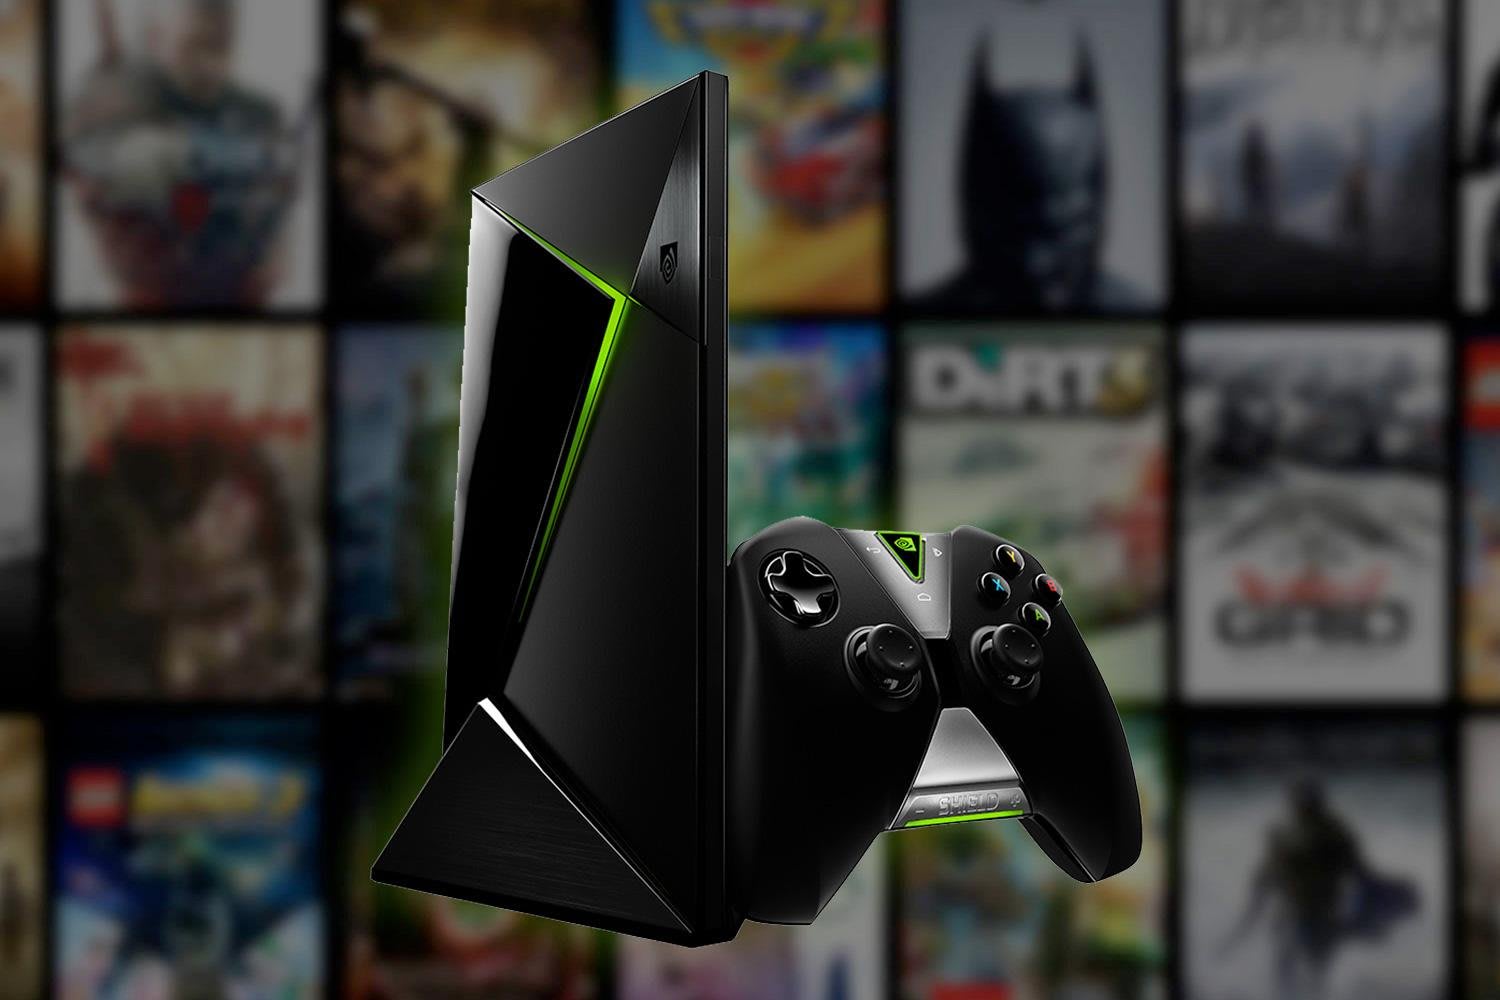 behave haircut Tend Nvidia Shield: 10 GeForce Now games